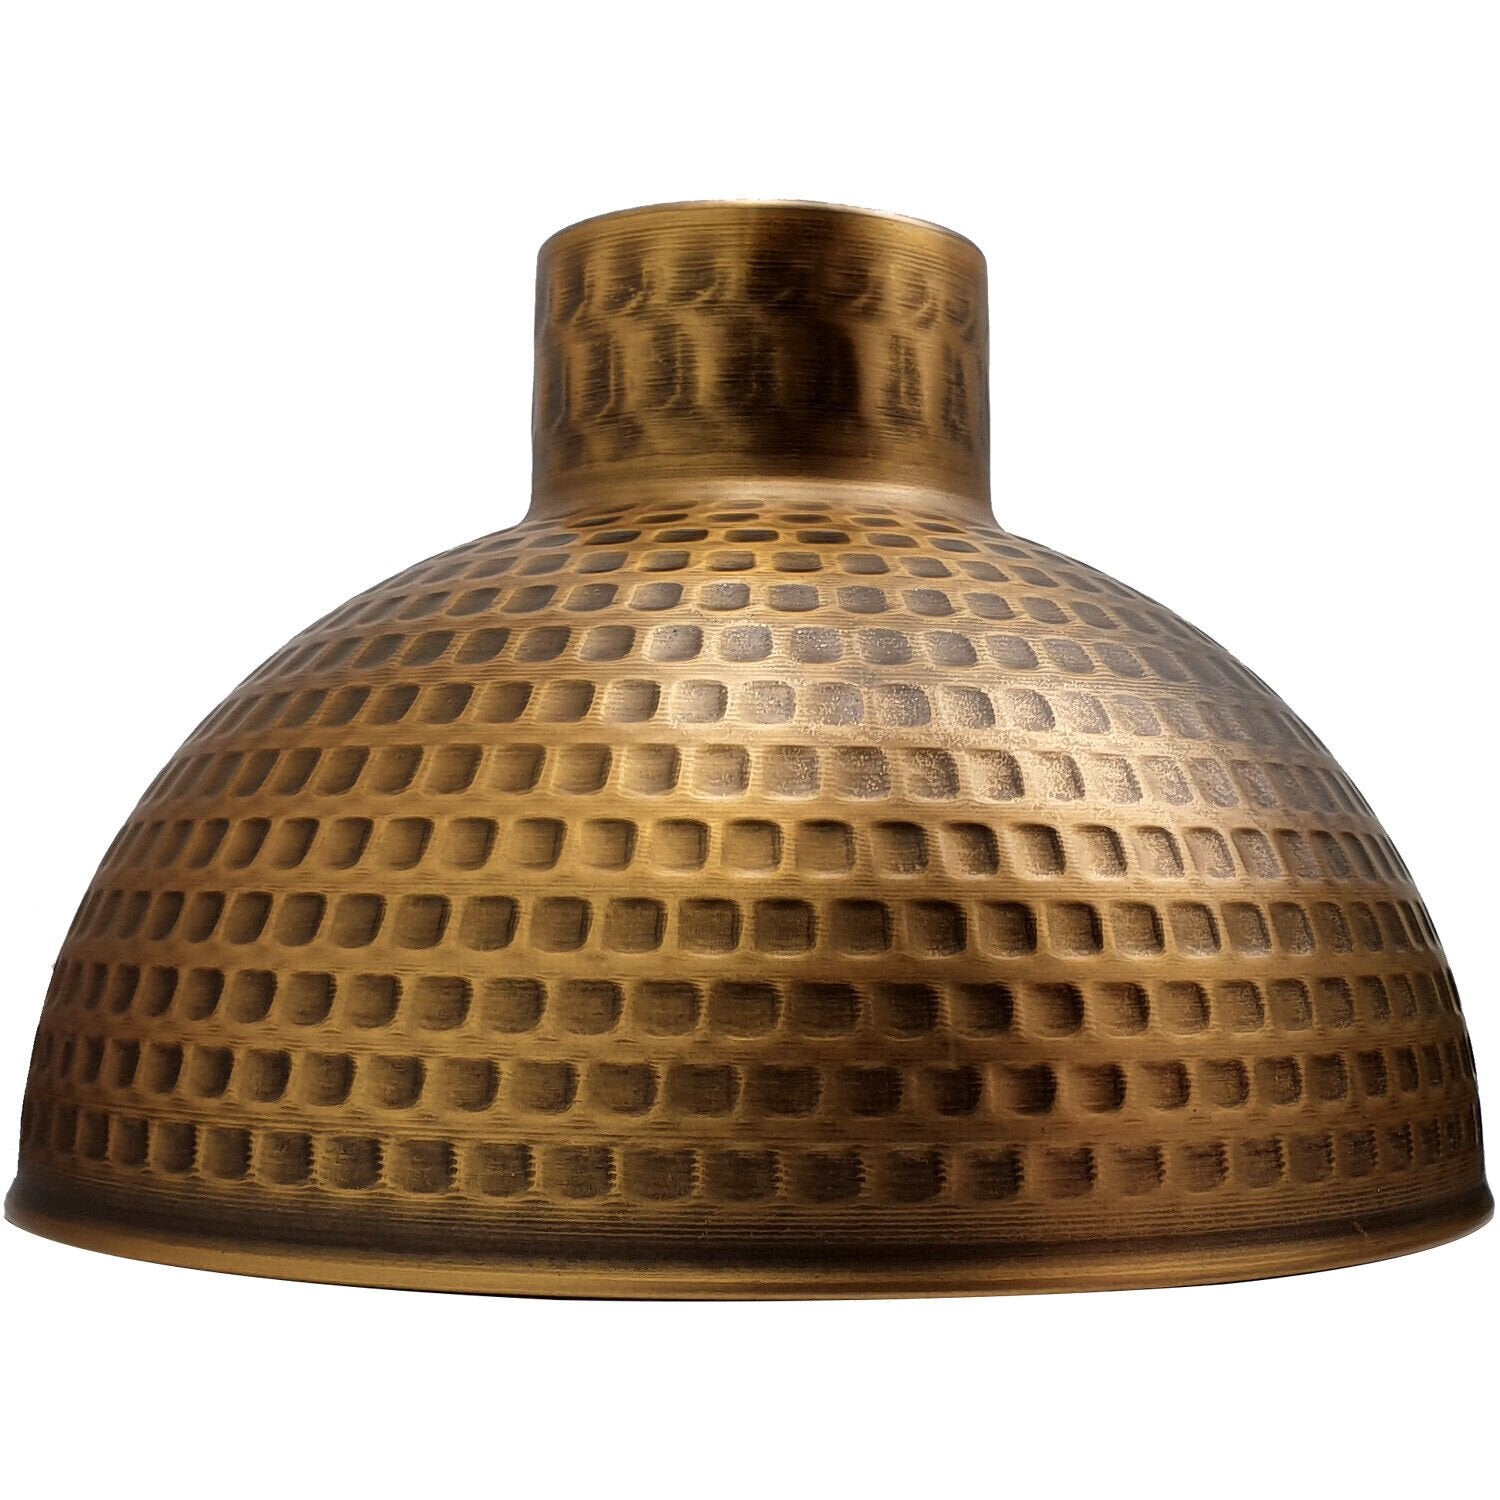 Yellow brass Lamp Shades for Ceiling Lights.JPG